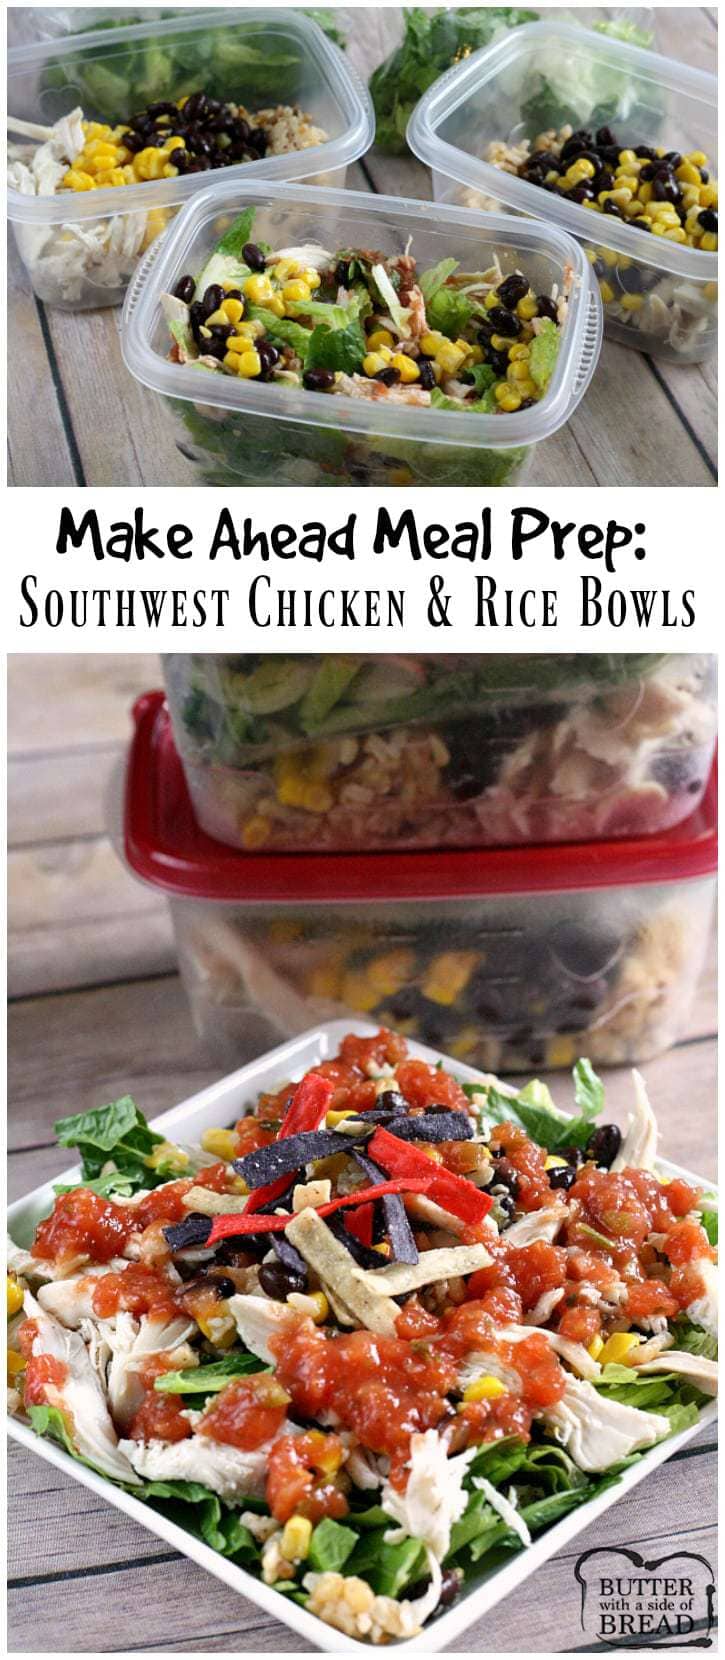 Make Ahead Meal Prep: Southwest Chicken and Rice Bowls - Butter With a Side of Bread